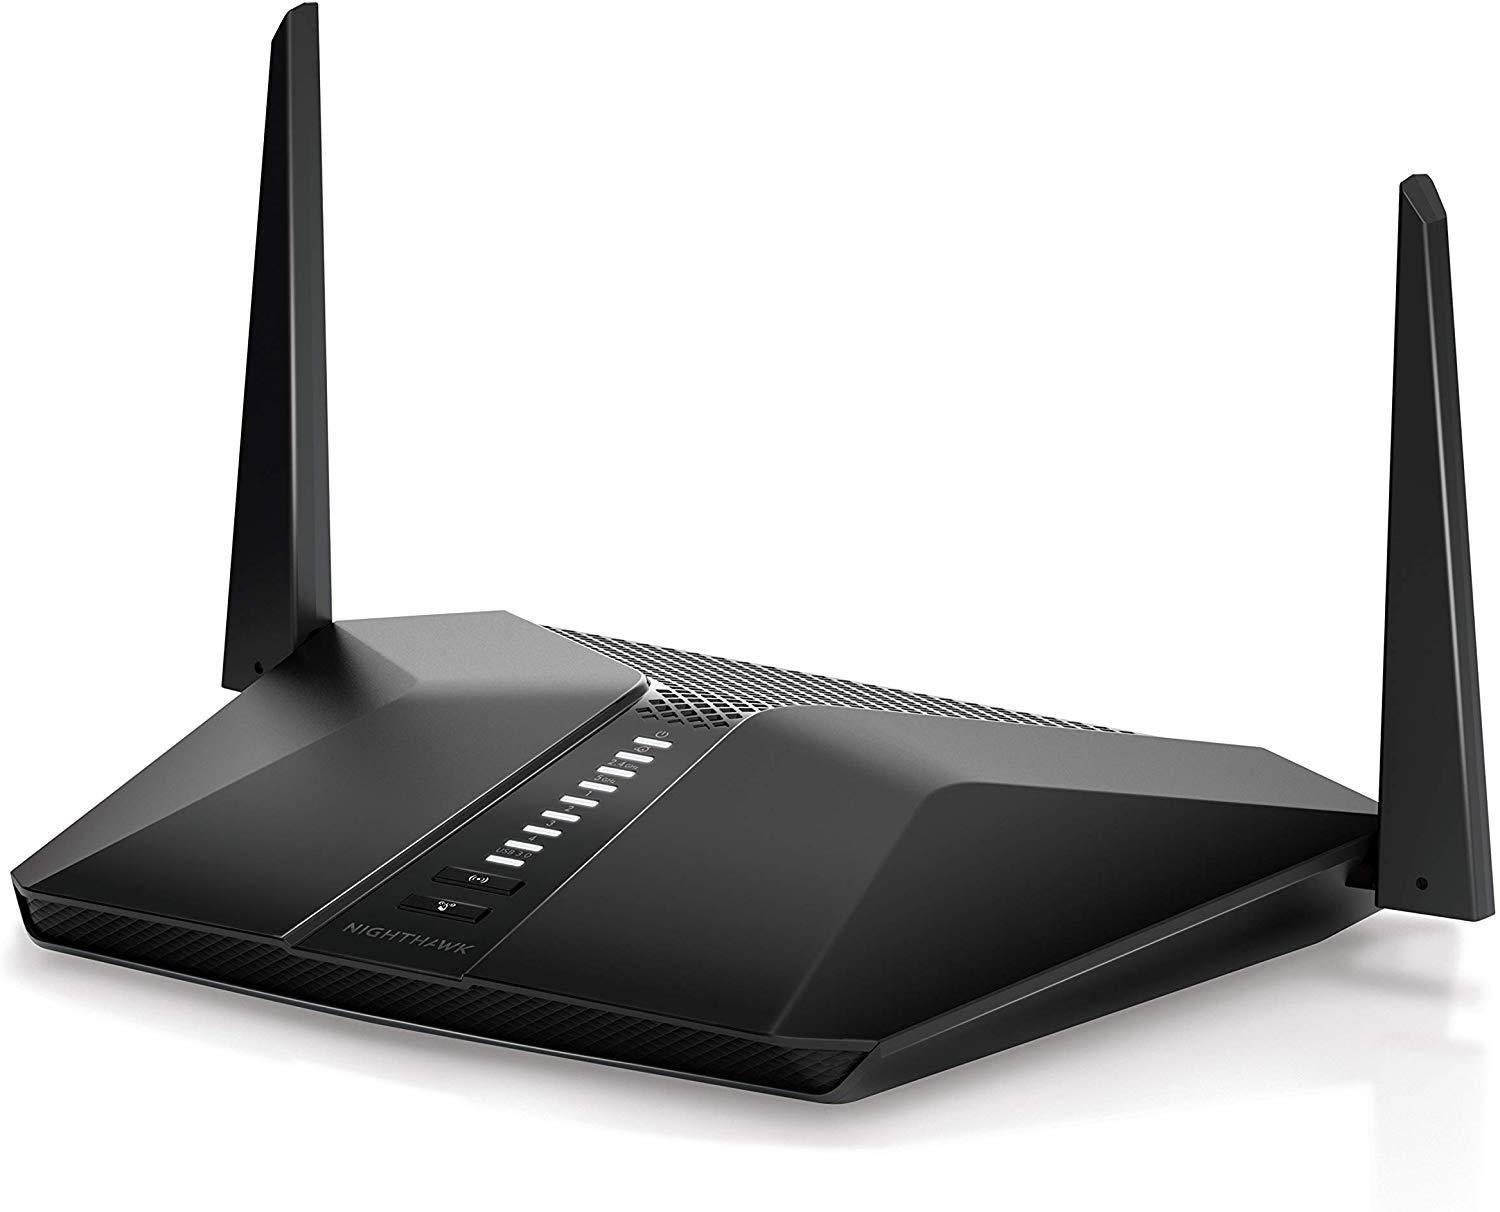 Bargains on equipment to improve Wi-Fi and routers at Amazon